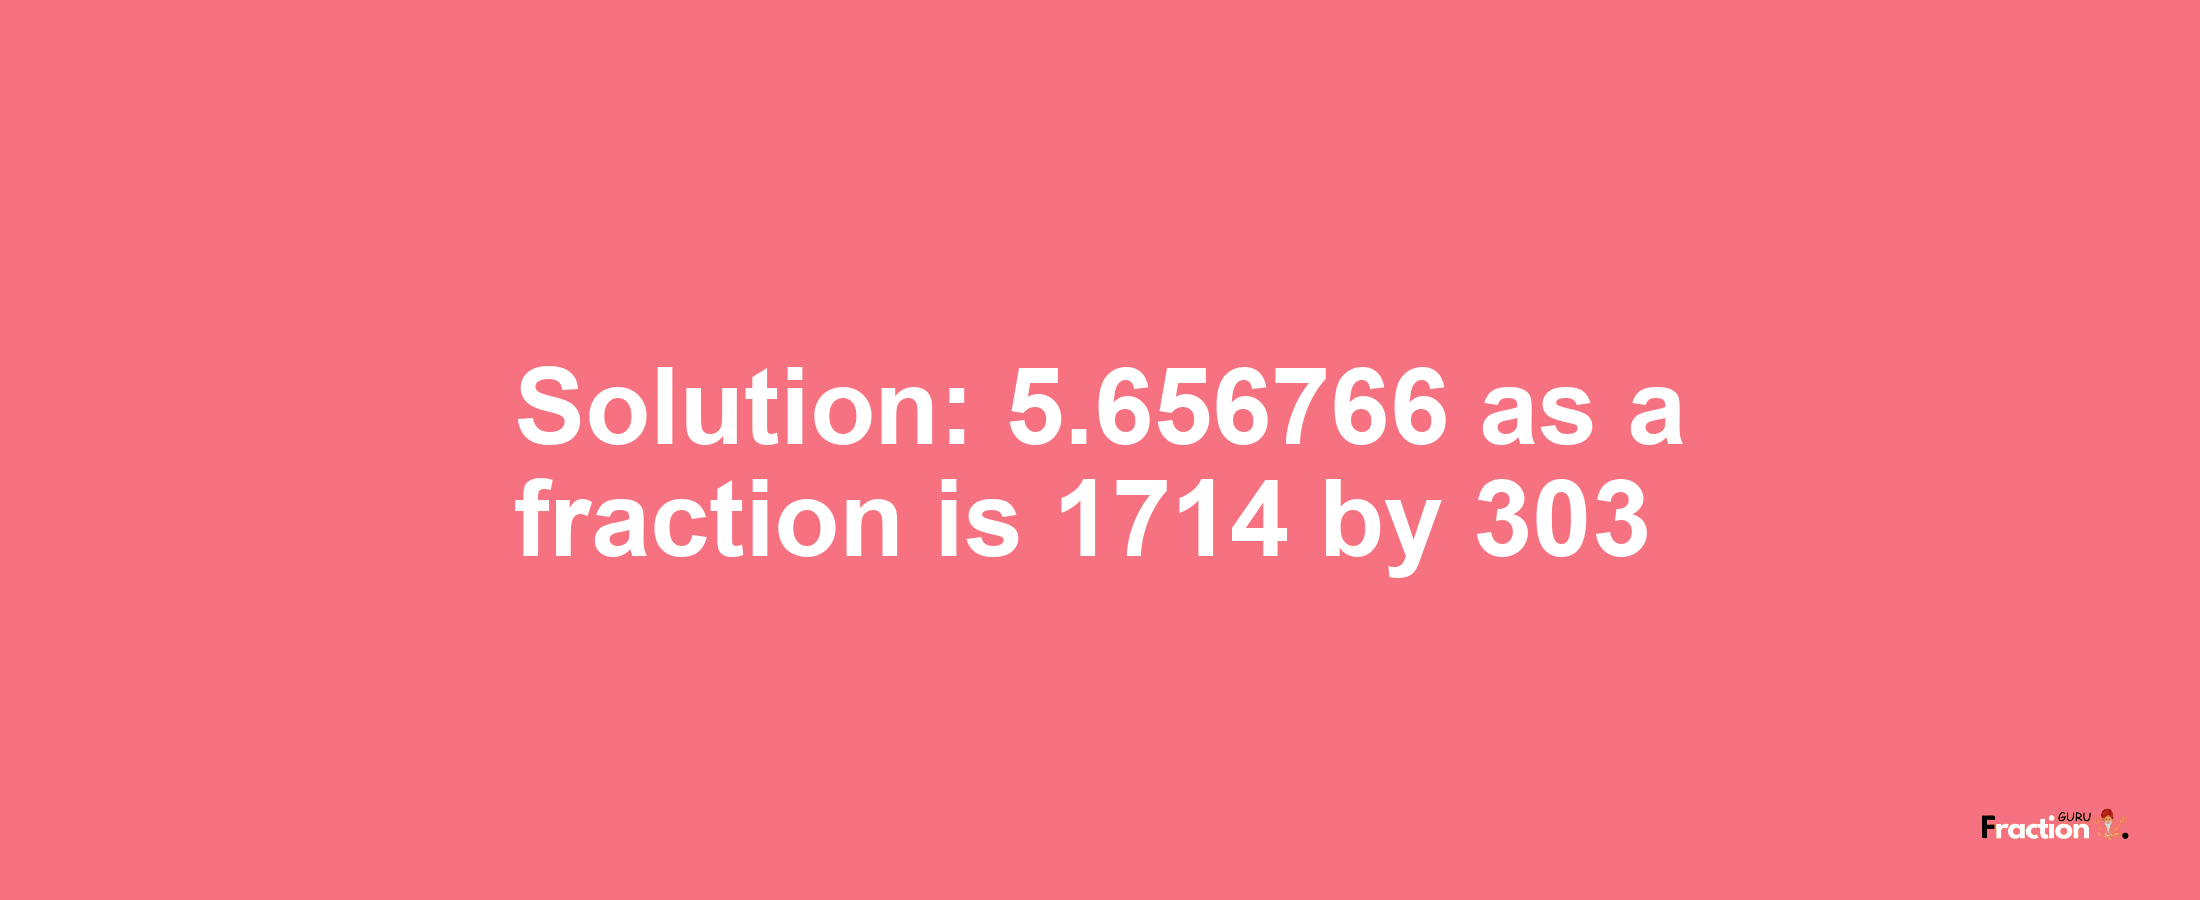 Solution:5.656766 as a fraction is 1714/303